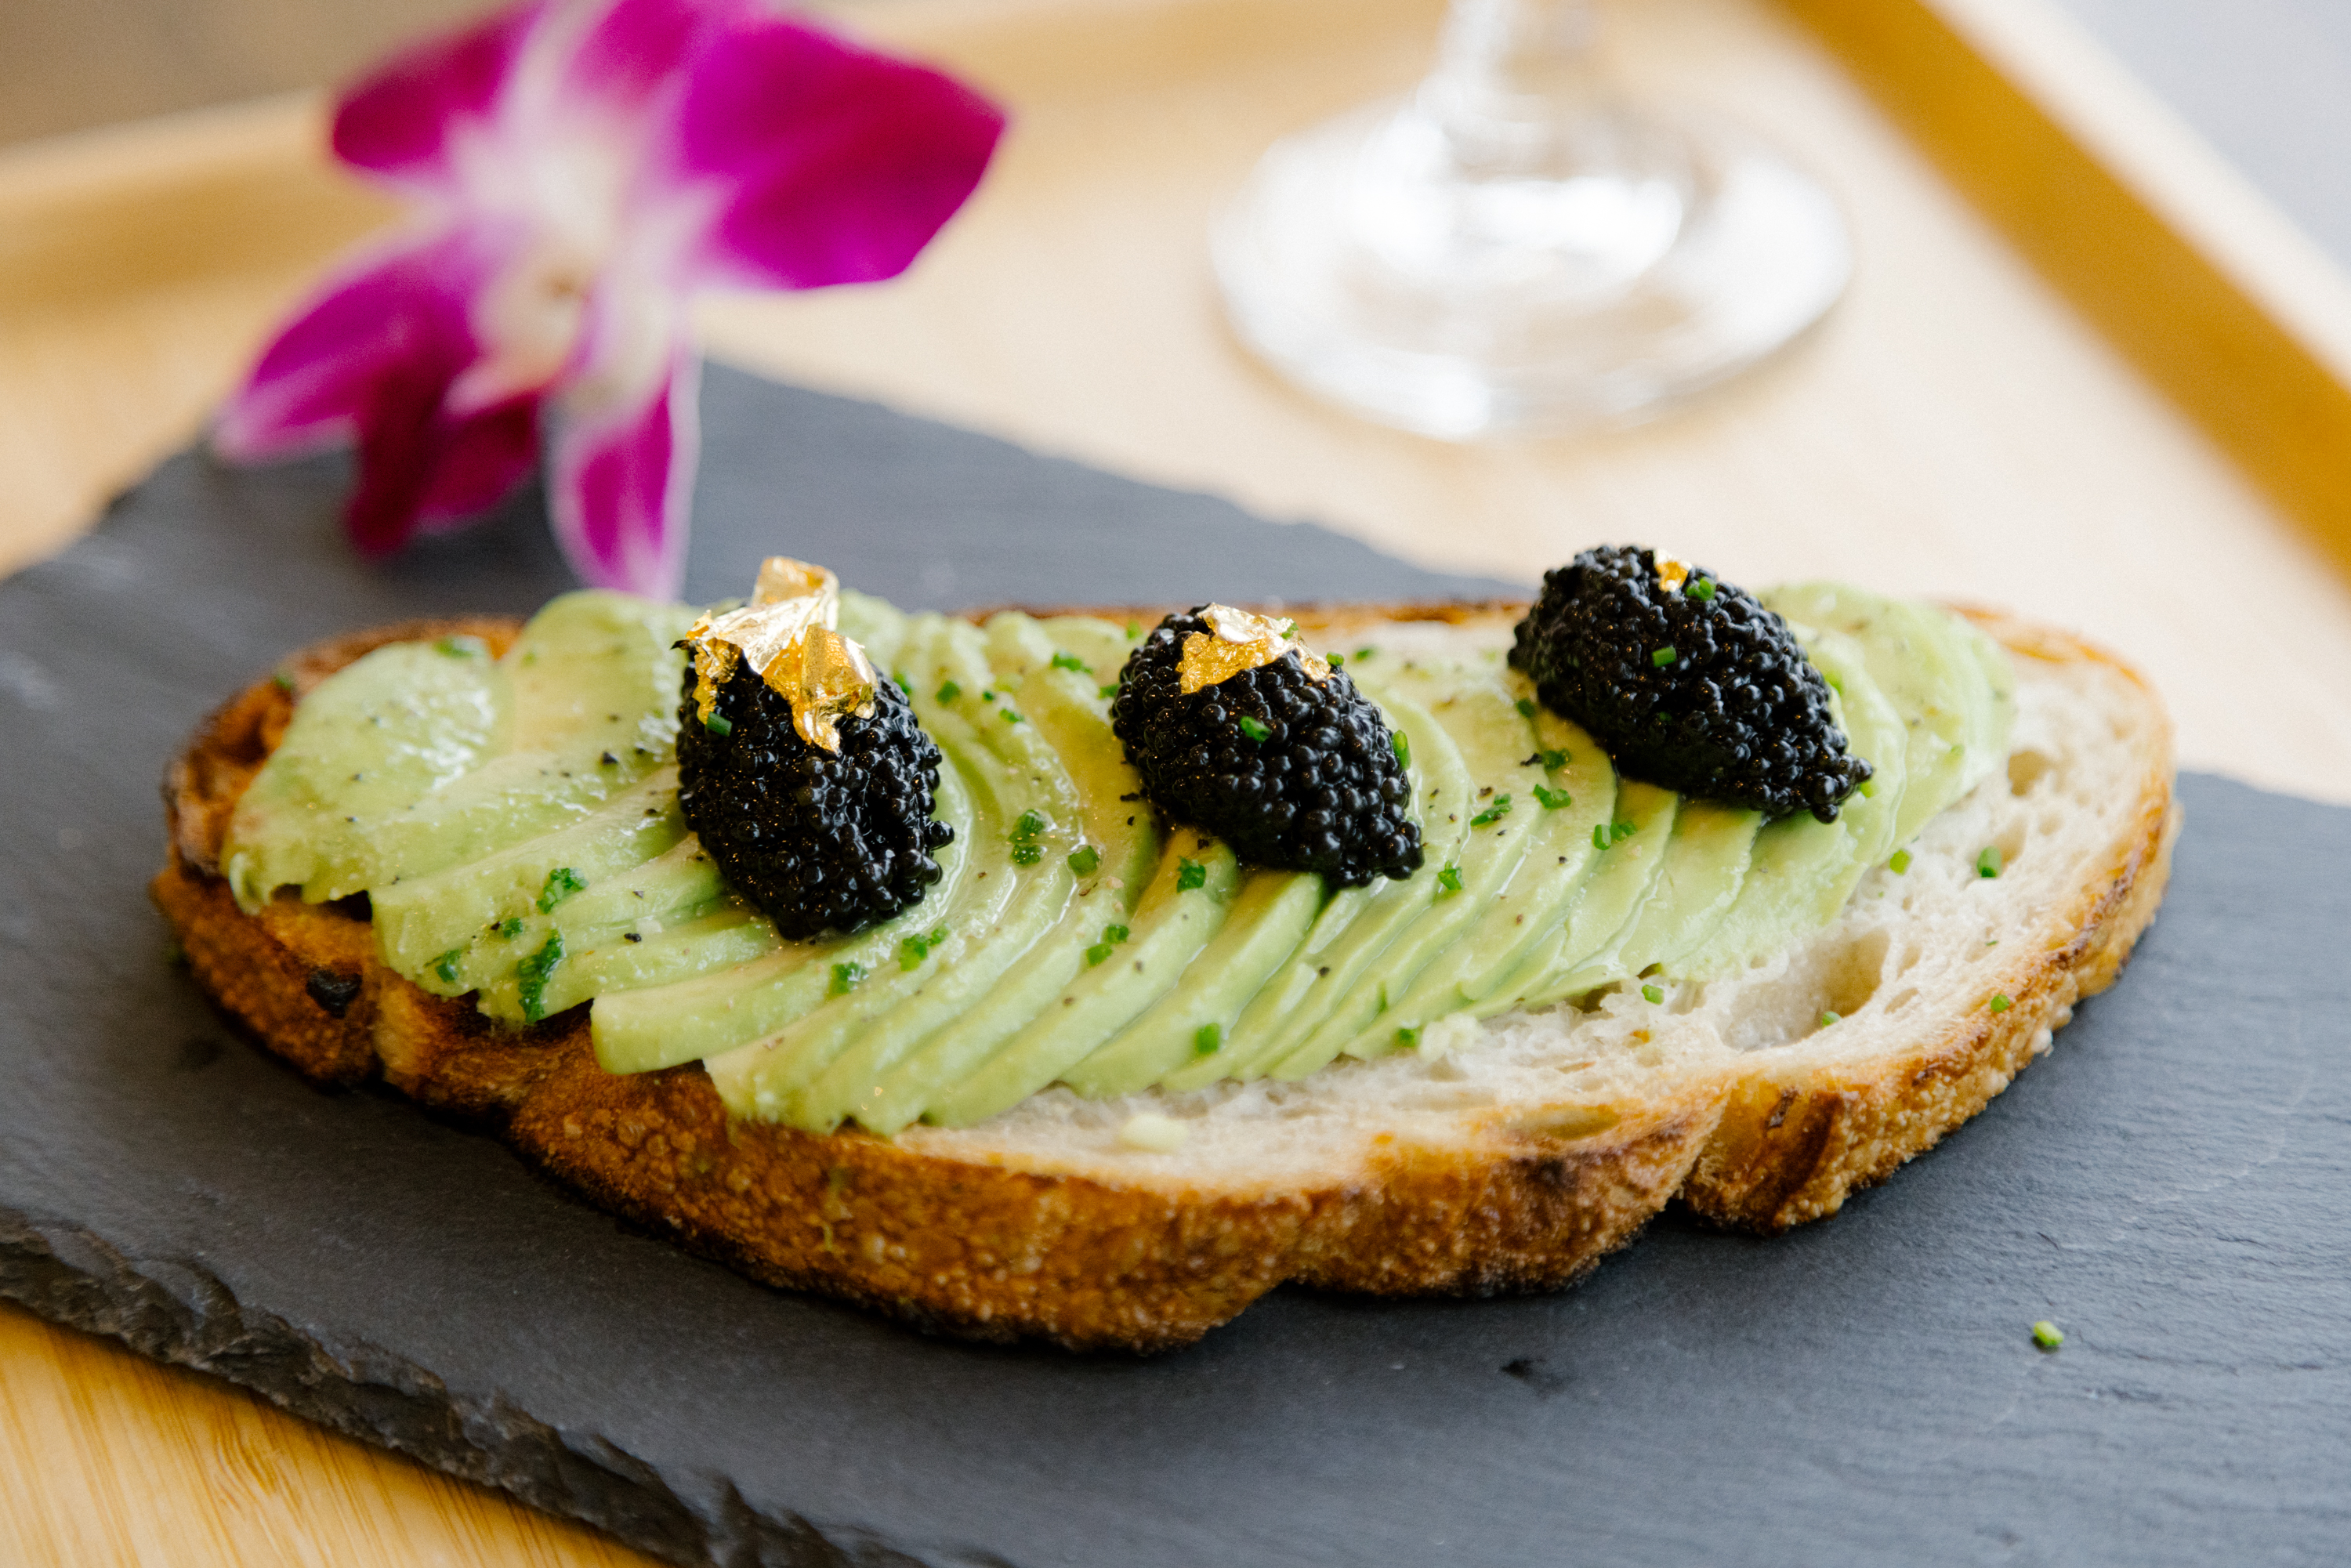 A slice of bread topped with avocado slices, caviar, and gold leaf on a slate plate, garnished with a purple flower.